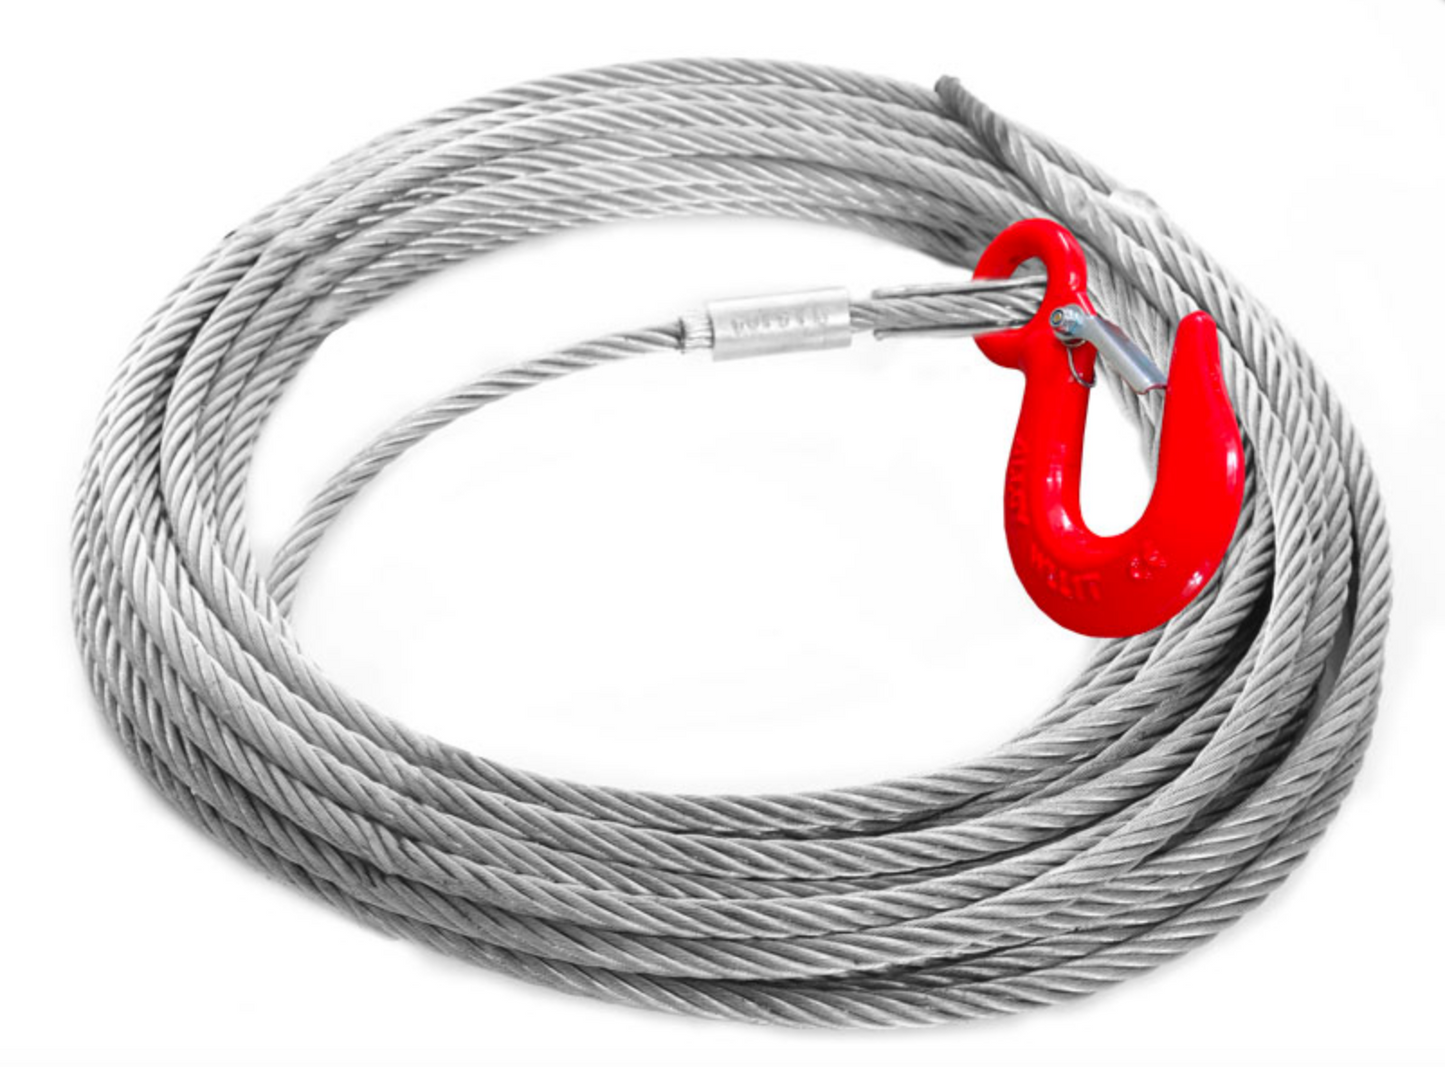 8.3mm Diameter 6x19 WSC Wire Rope to suit GT Viper Winch 800kg Capacity